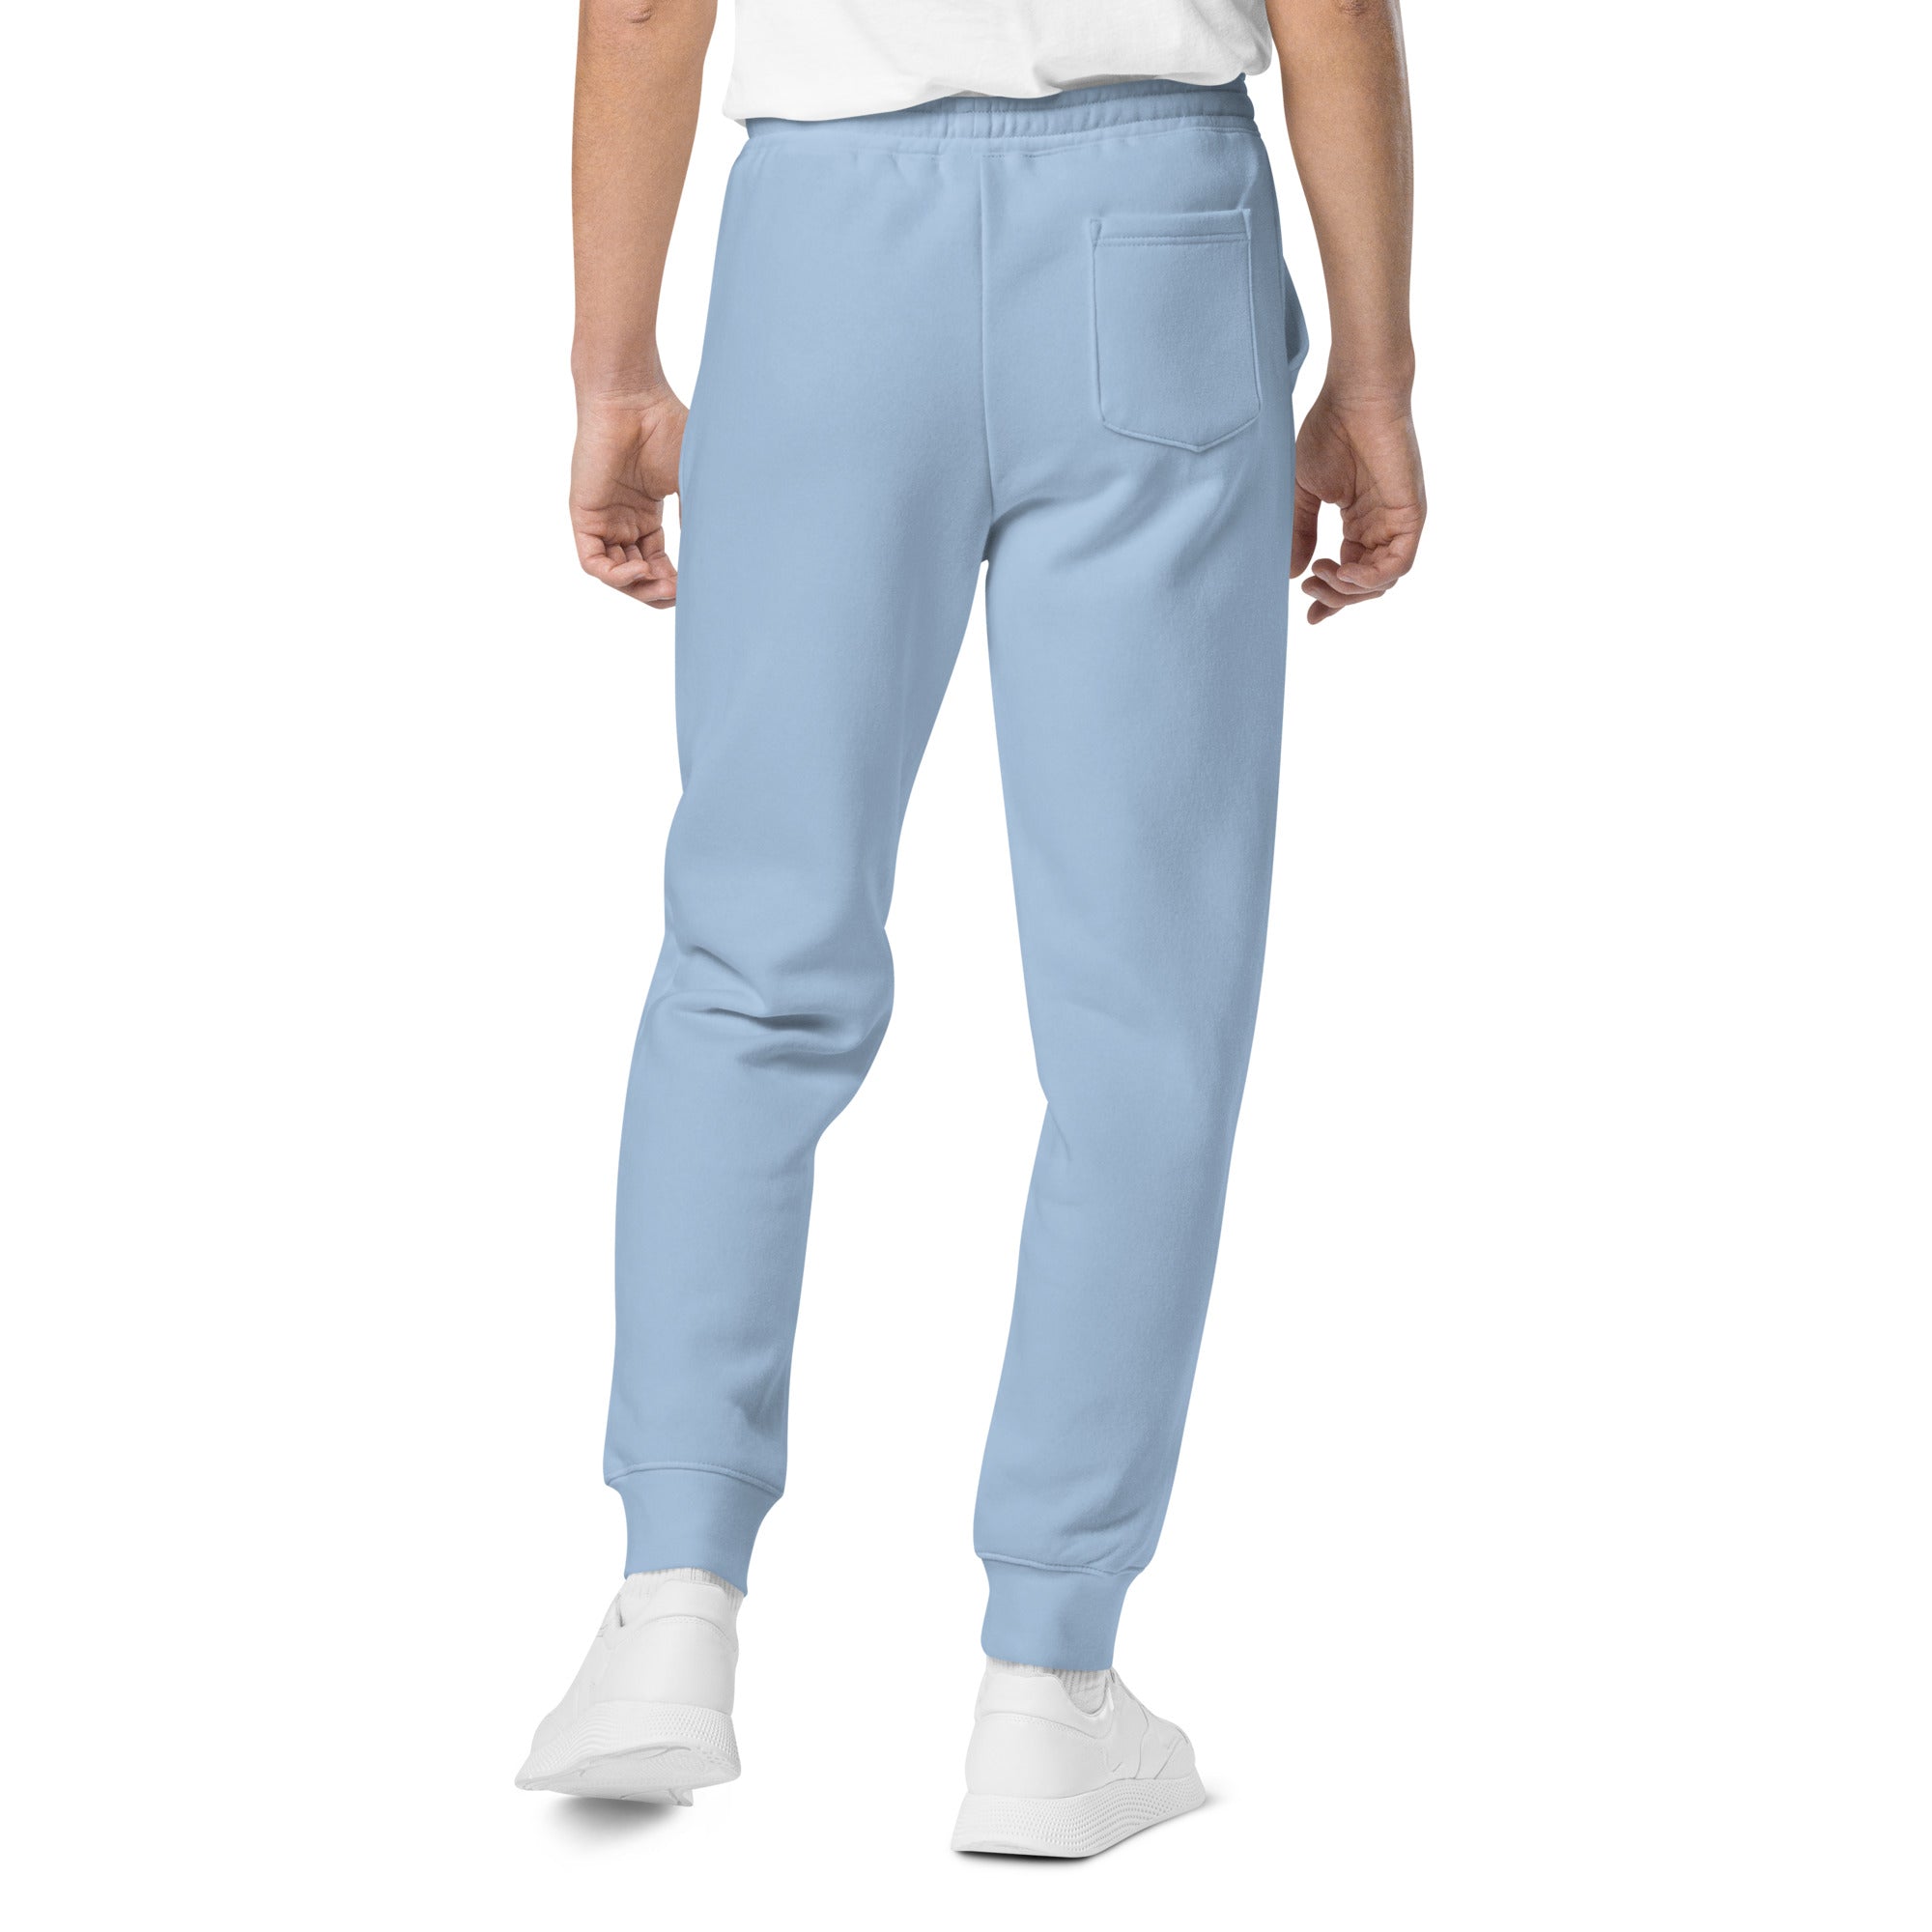 Unisex pigment-dyed yoga sweatpants - Personal Hour for Yoga and Meditations 